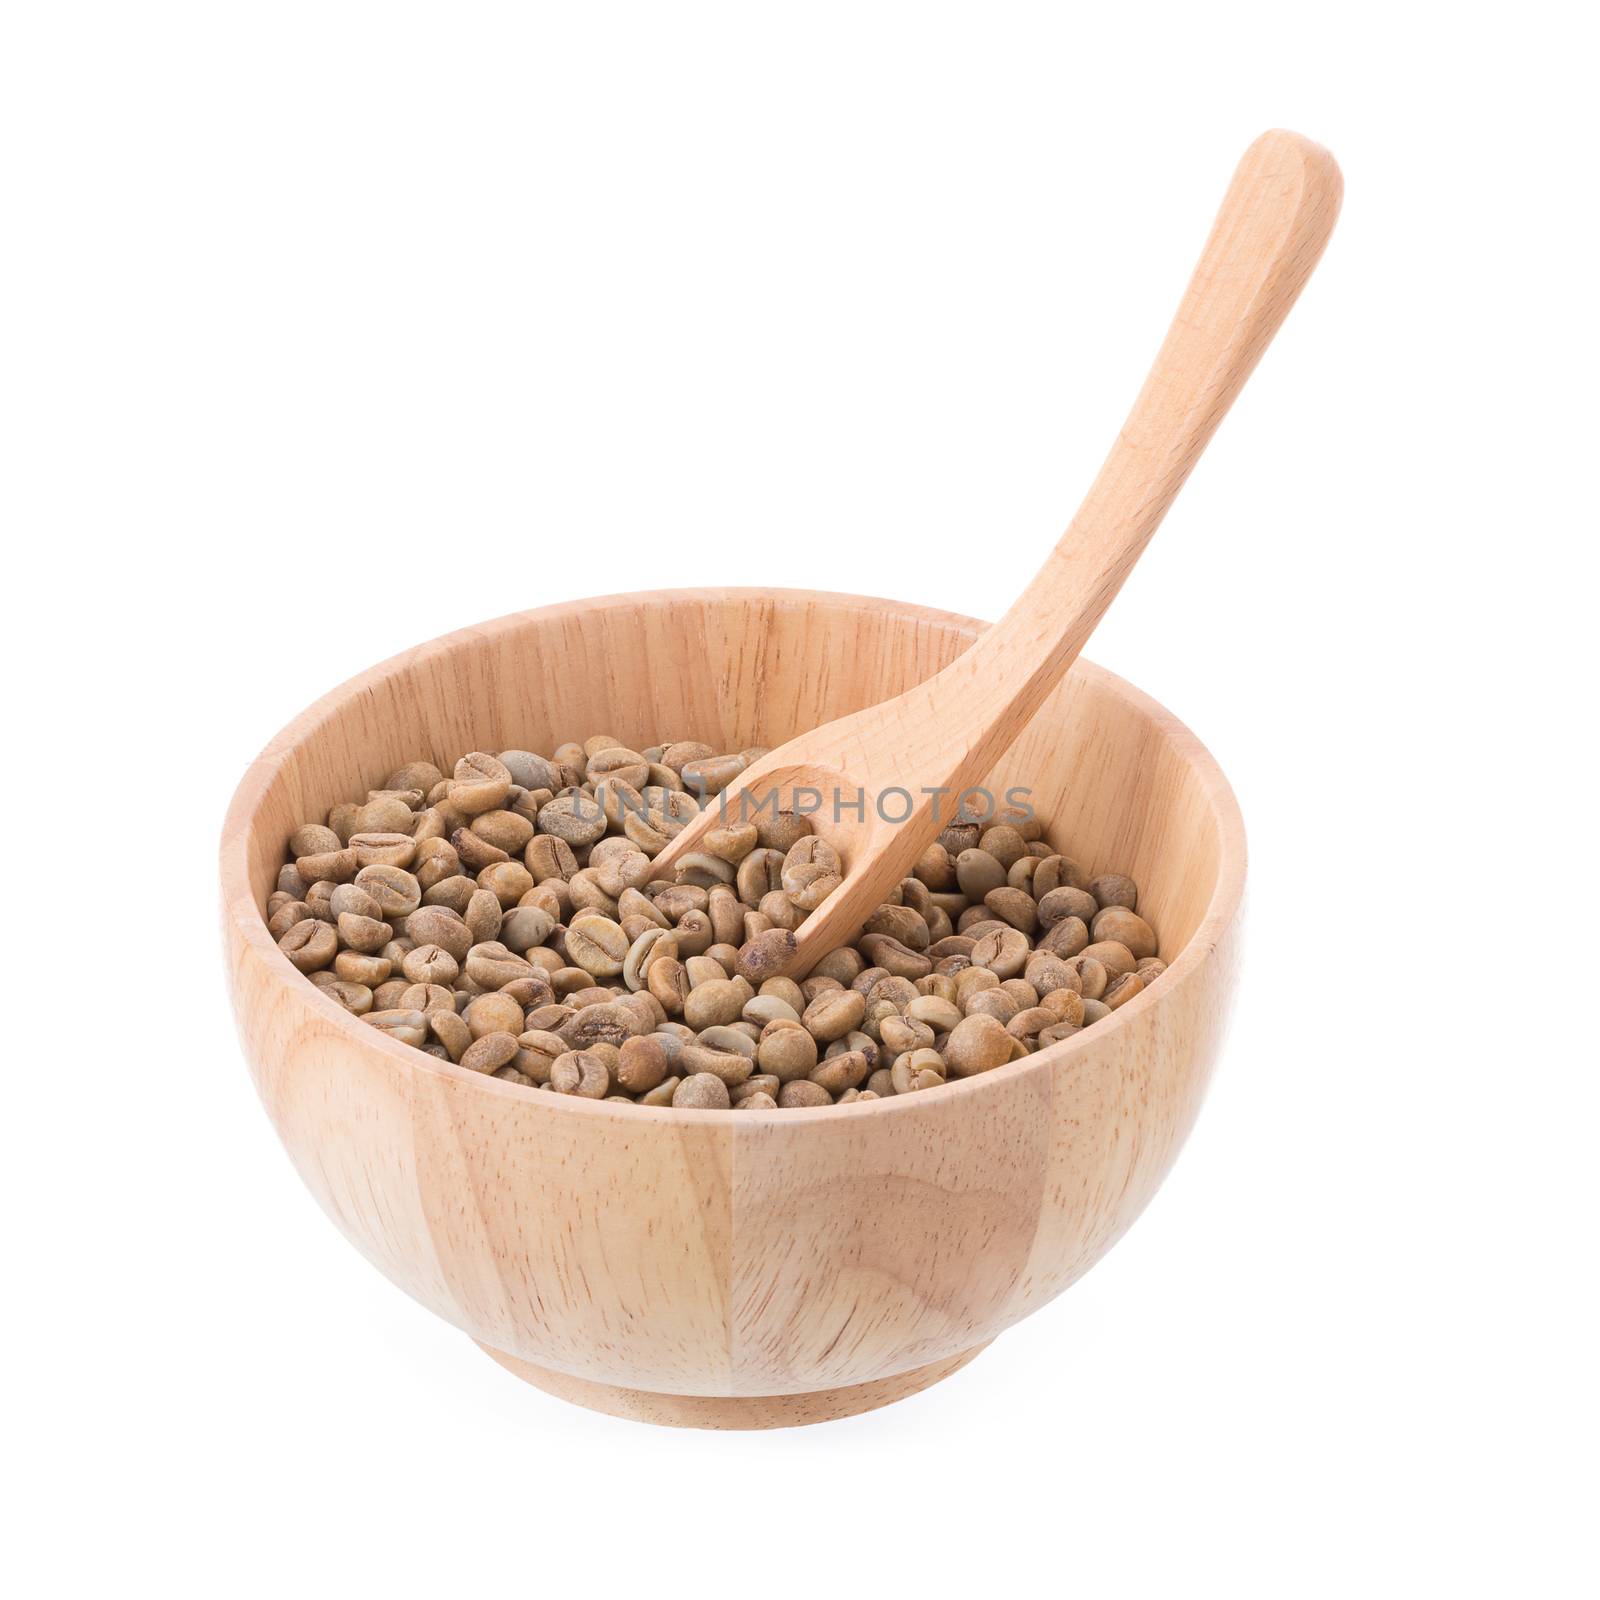 Green Arabica coffee beans in a wooden bowl Isolated on a white background.